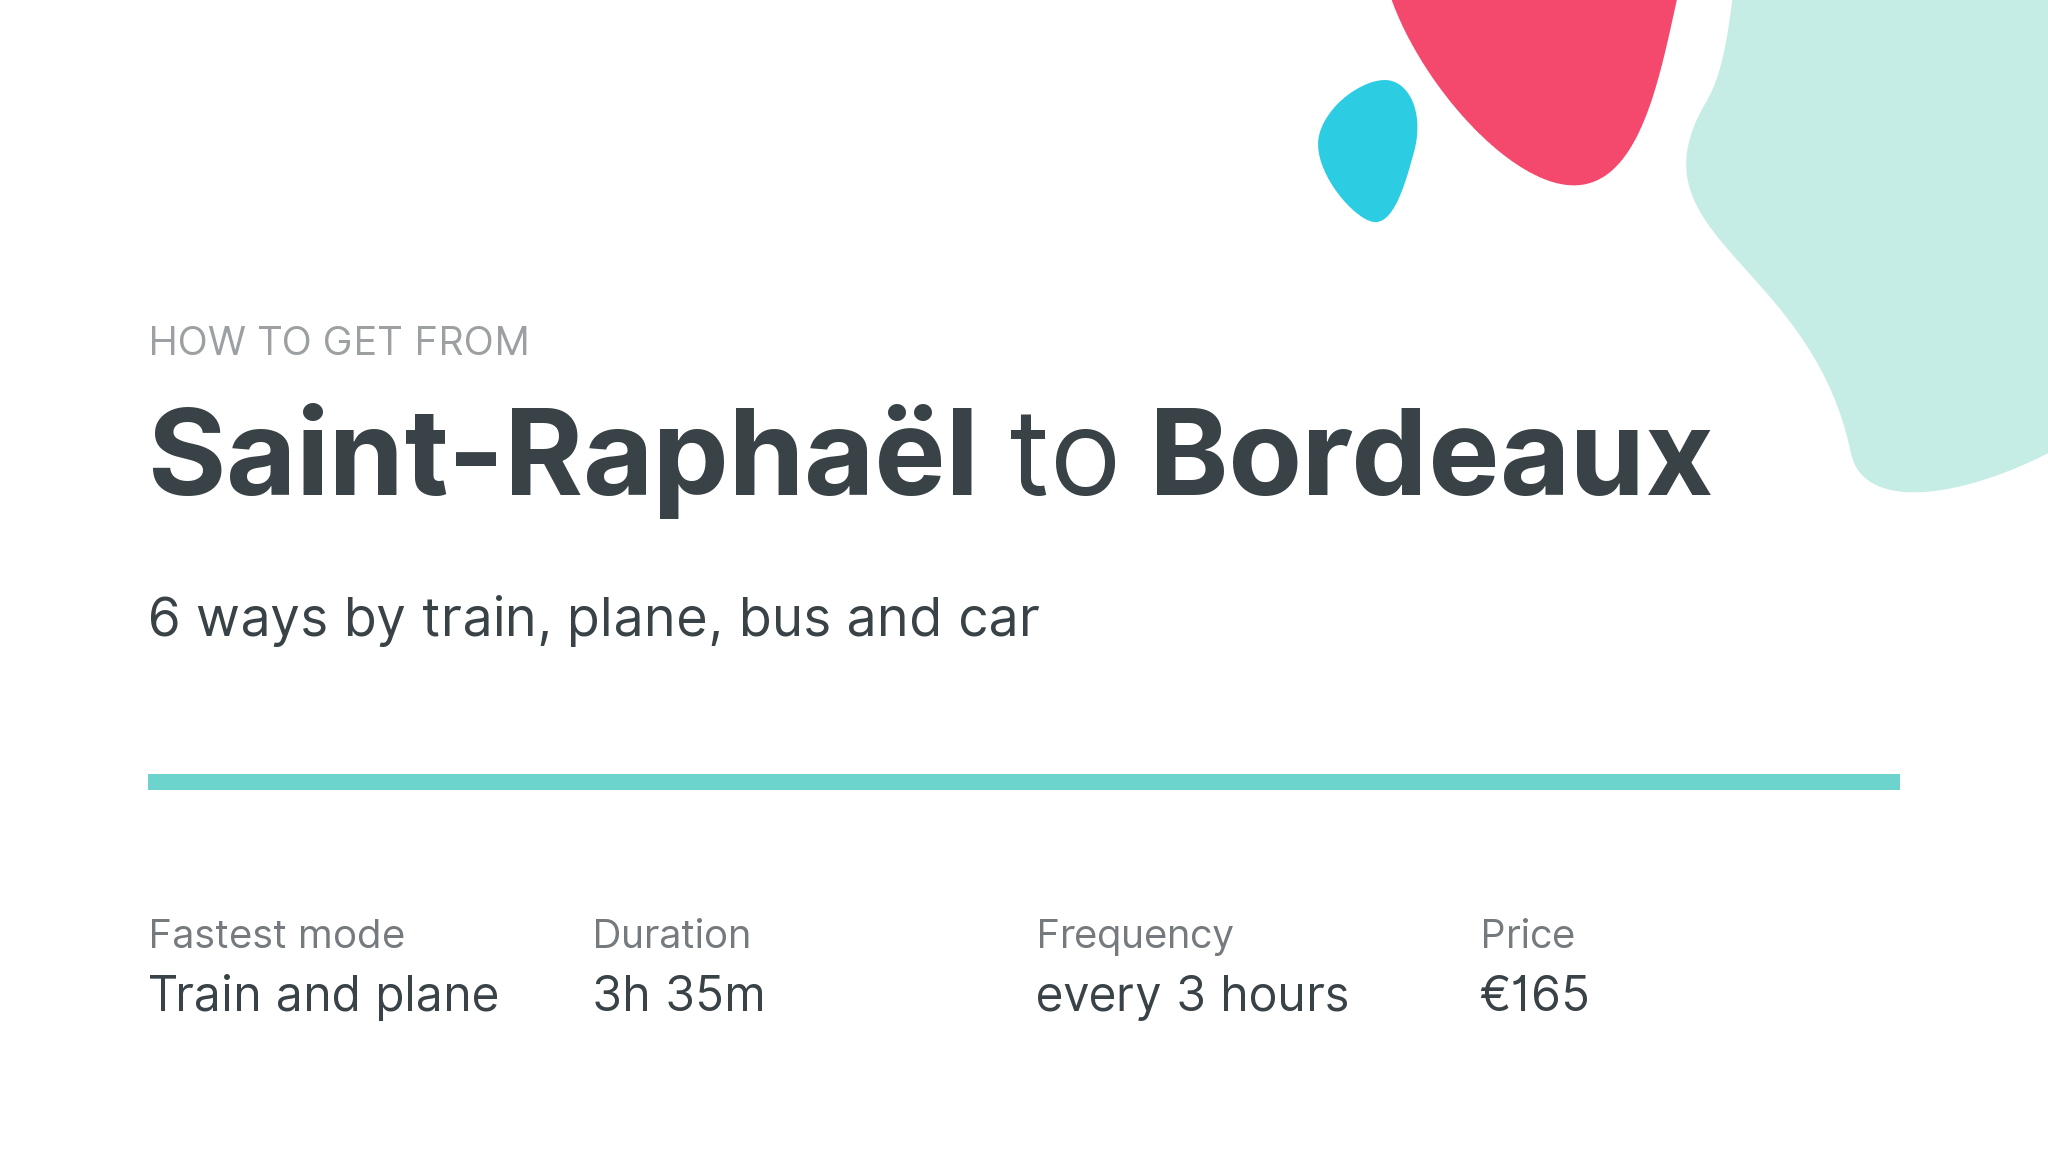 How do I get from Saint-Raphaël to Bordeaux